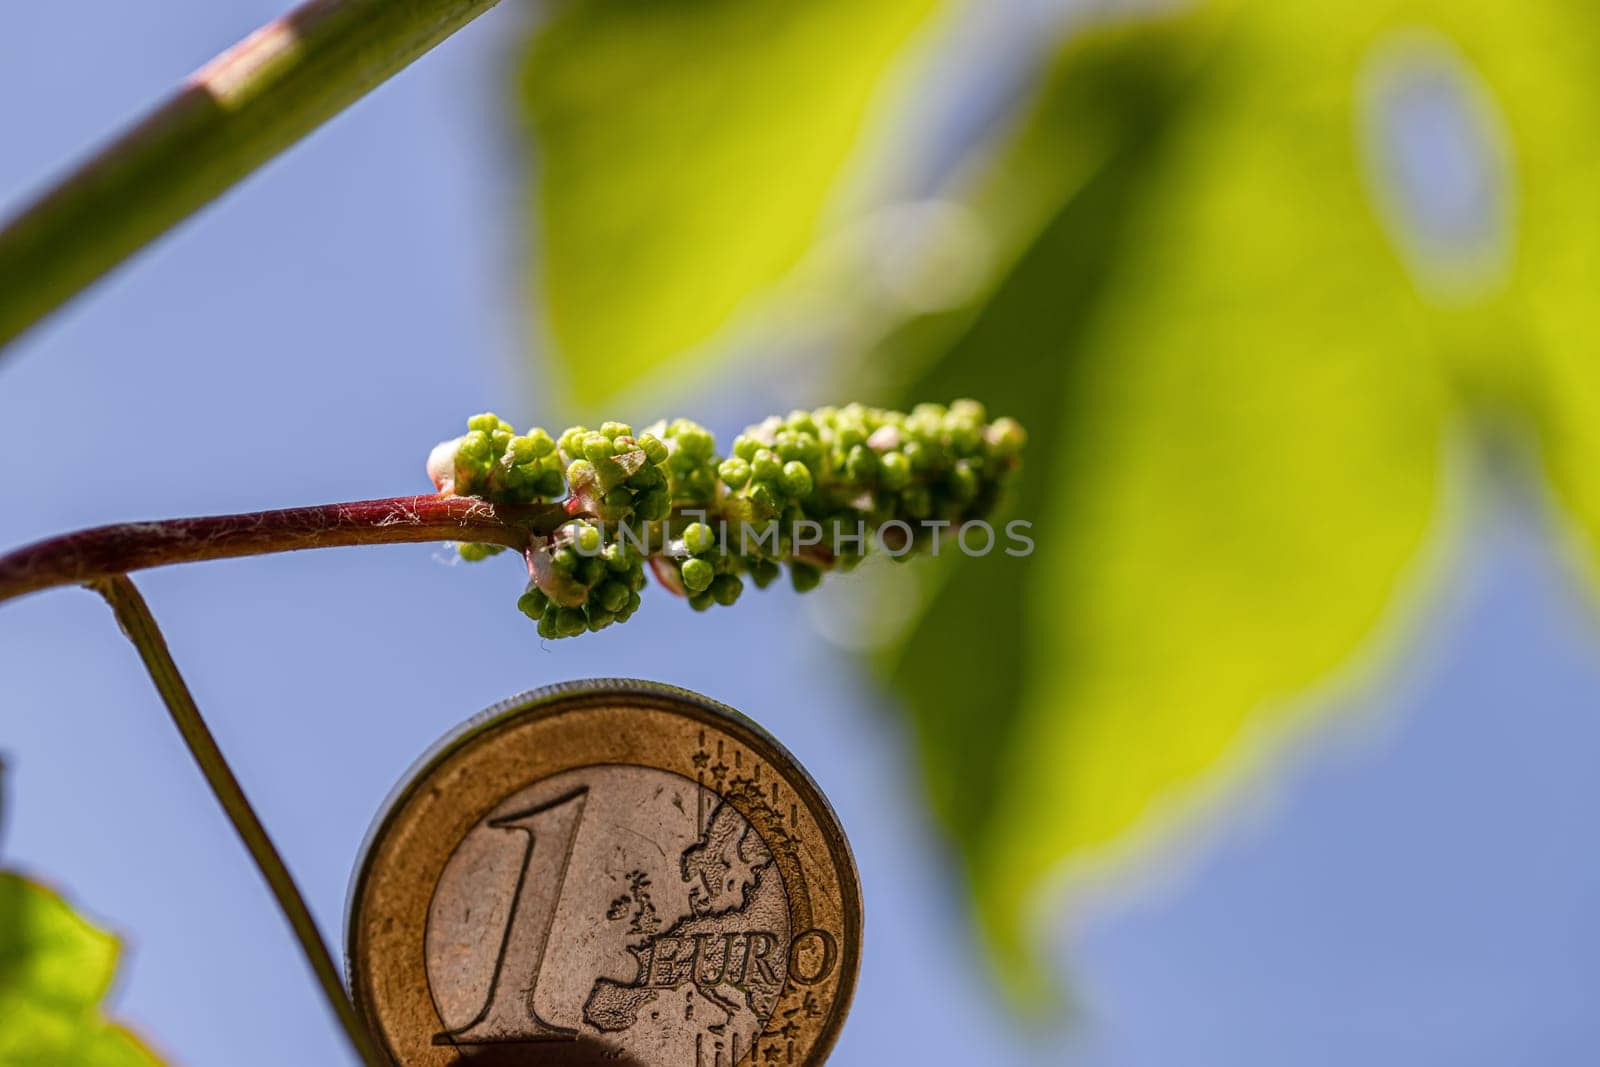 A very small grape brush on the background of a 1 euro coin